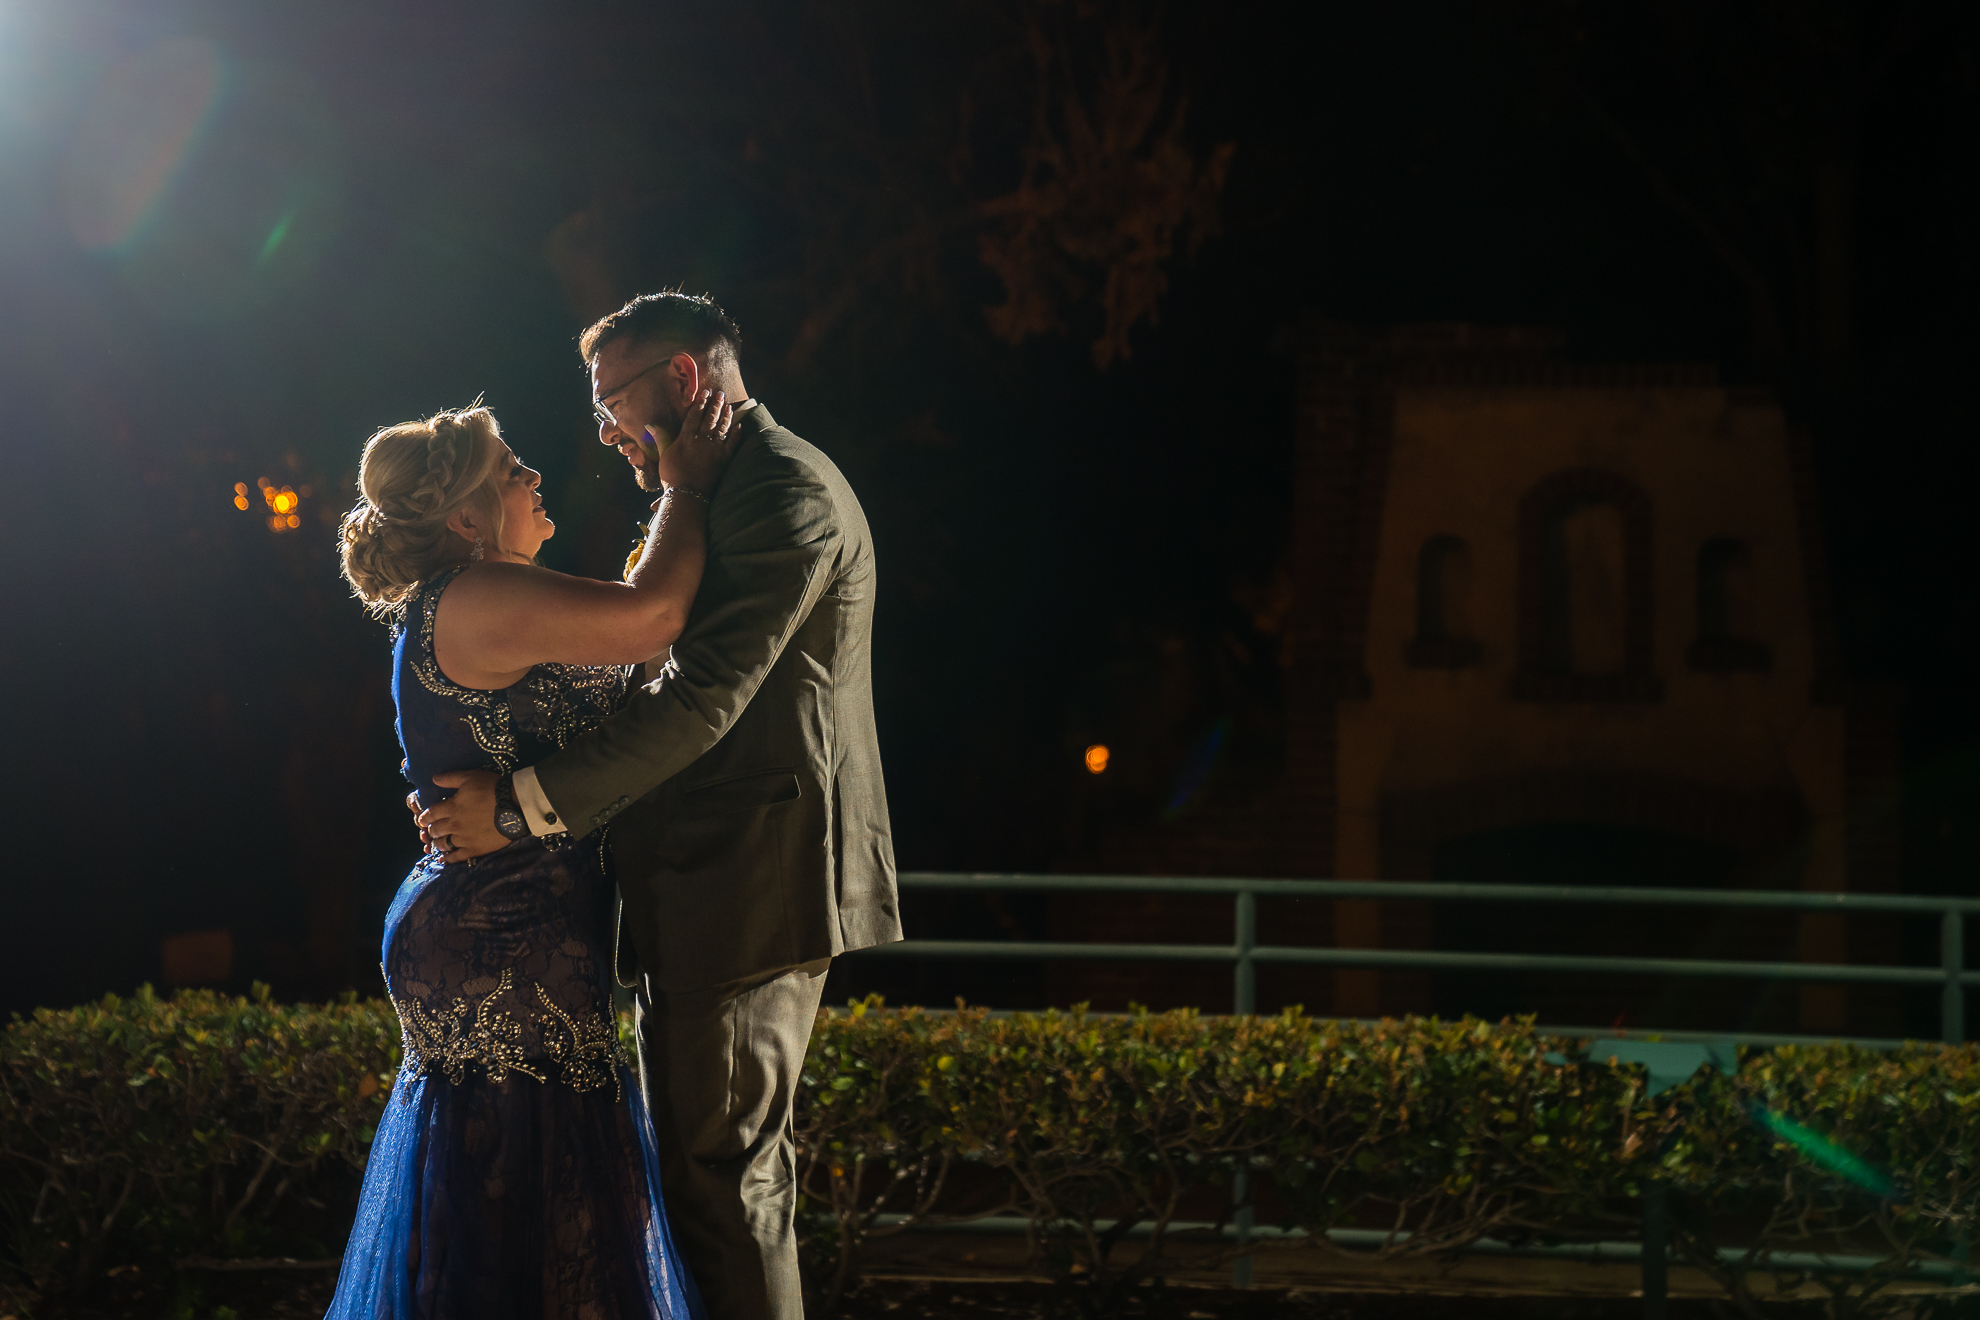 ThomasKim_photography A bride and groom embrace in front of a light at night during their special moment (S&A).